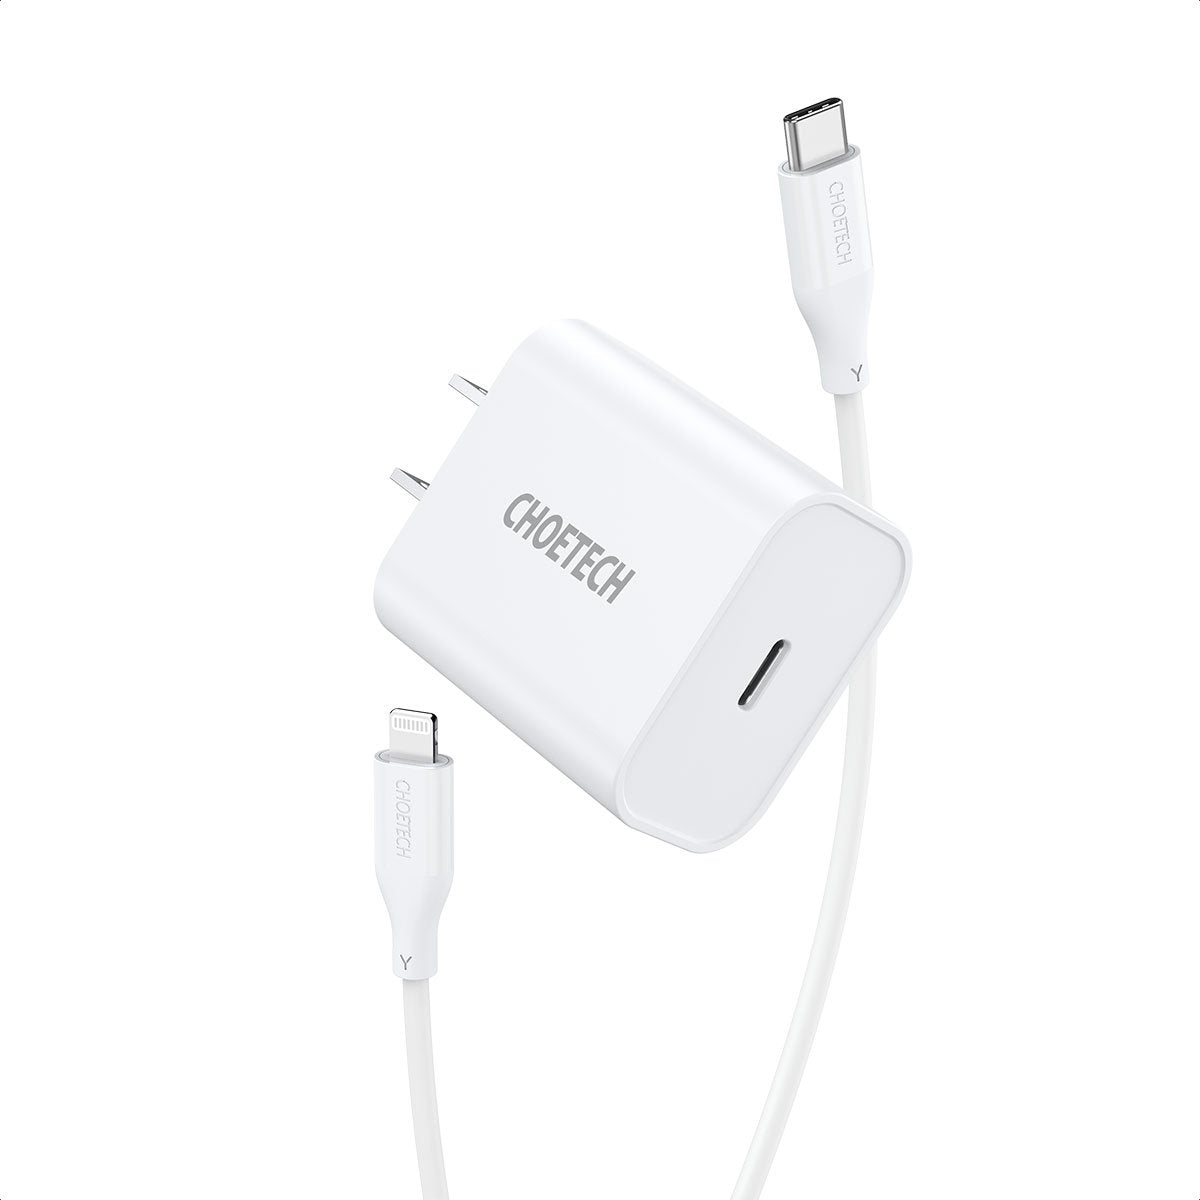 Q5004 CHOETECH PD Fast Type C Wall Charger 20W Compatible iPhone 12 Pro Max/12 Mini/11 Pro Max